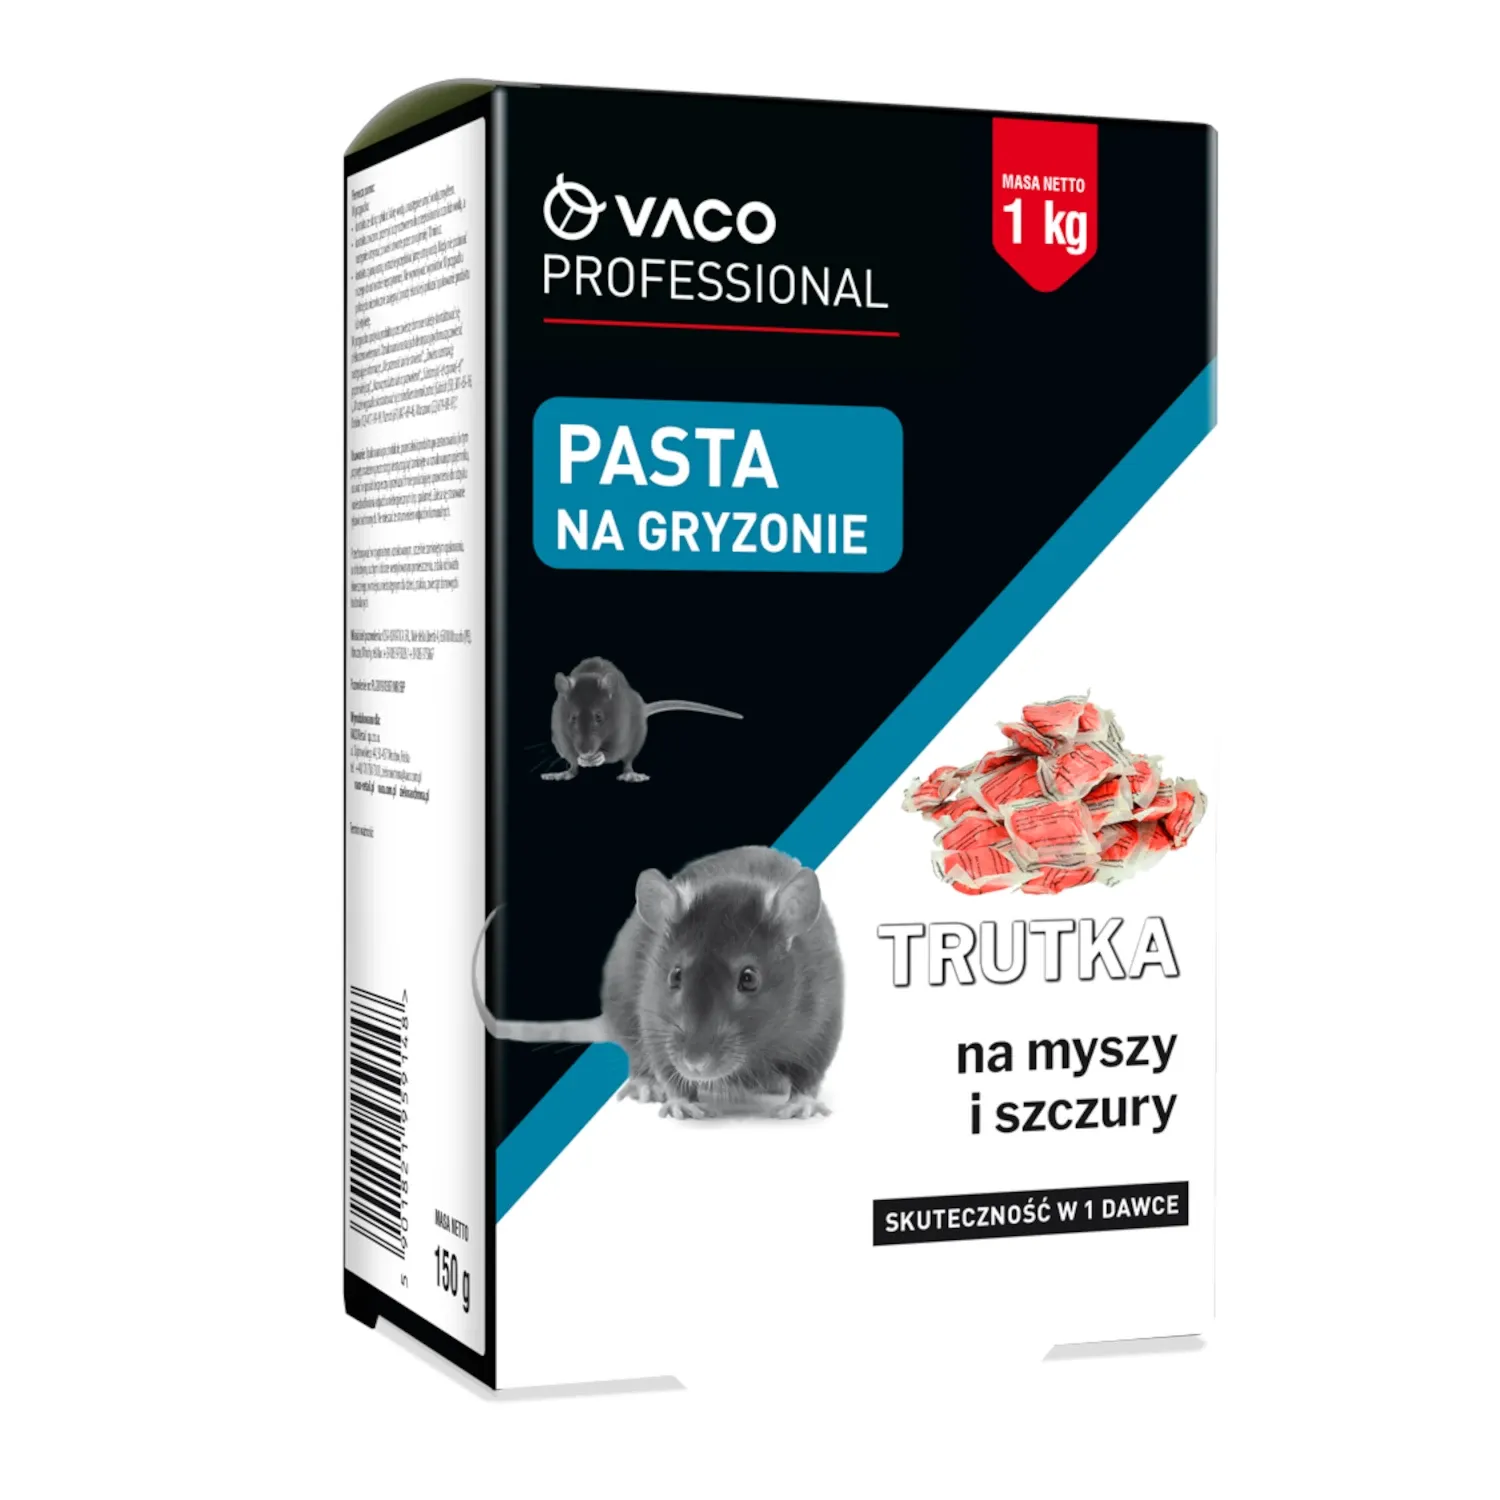 VACO PROFESSIONAL PASTE FOR MICE AND RATS (BOX) 1 KG